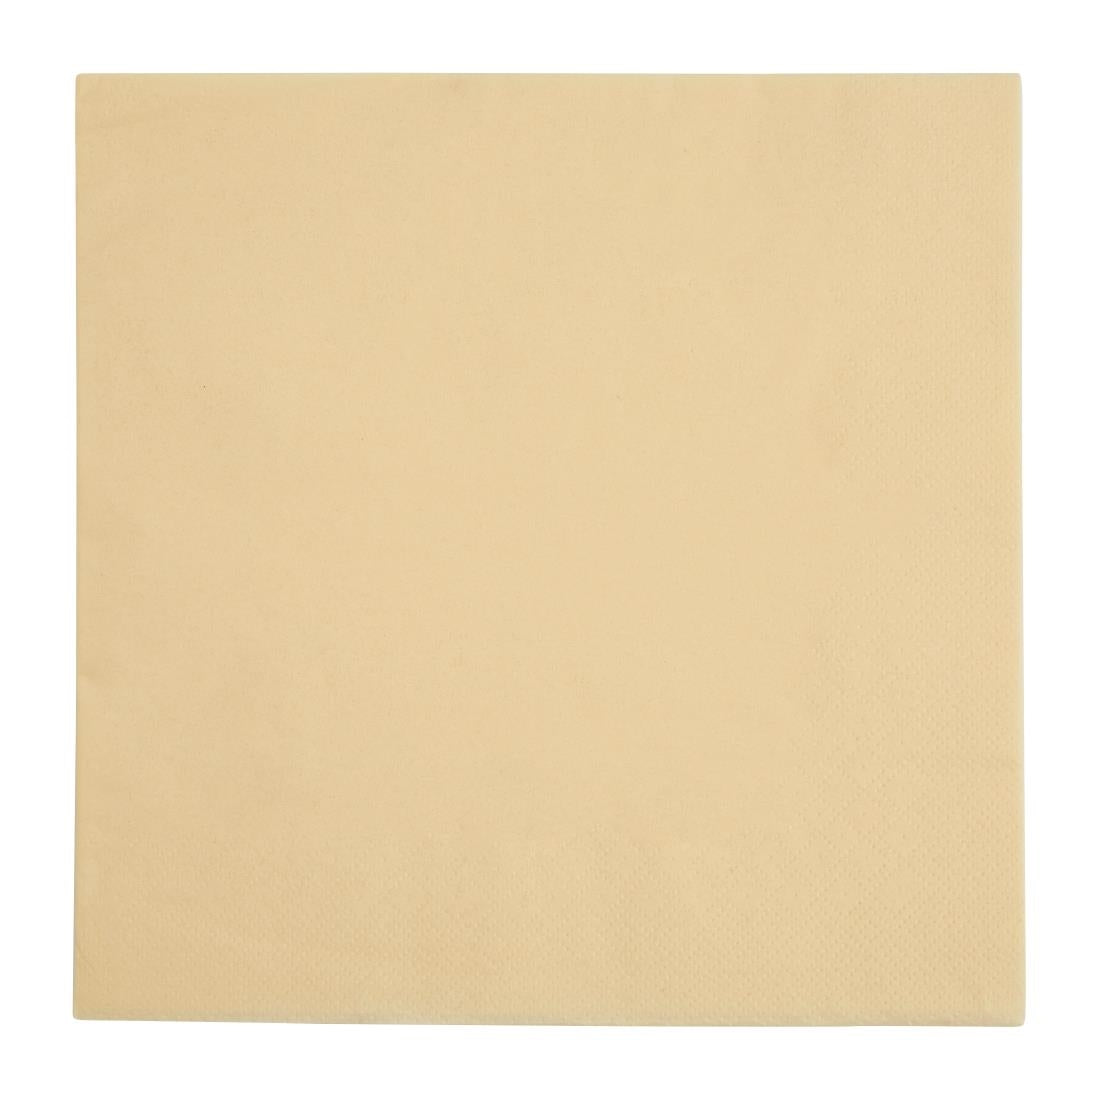 FE236 Fiesta Recyclable Dinner Napkin Cream 40x40cm 2ply 1/4 Fold (Pack of 2000) JD Catering Equipment Solutions Ltd